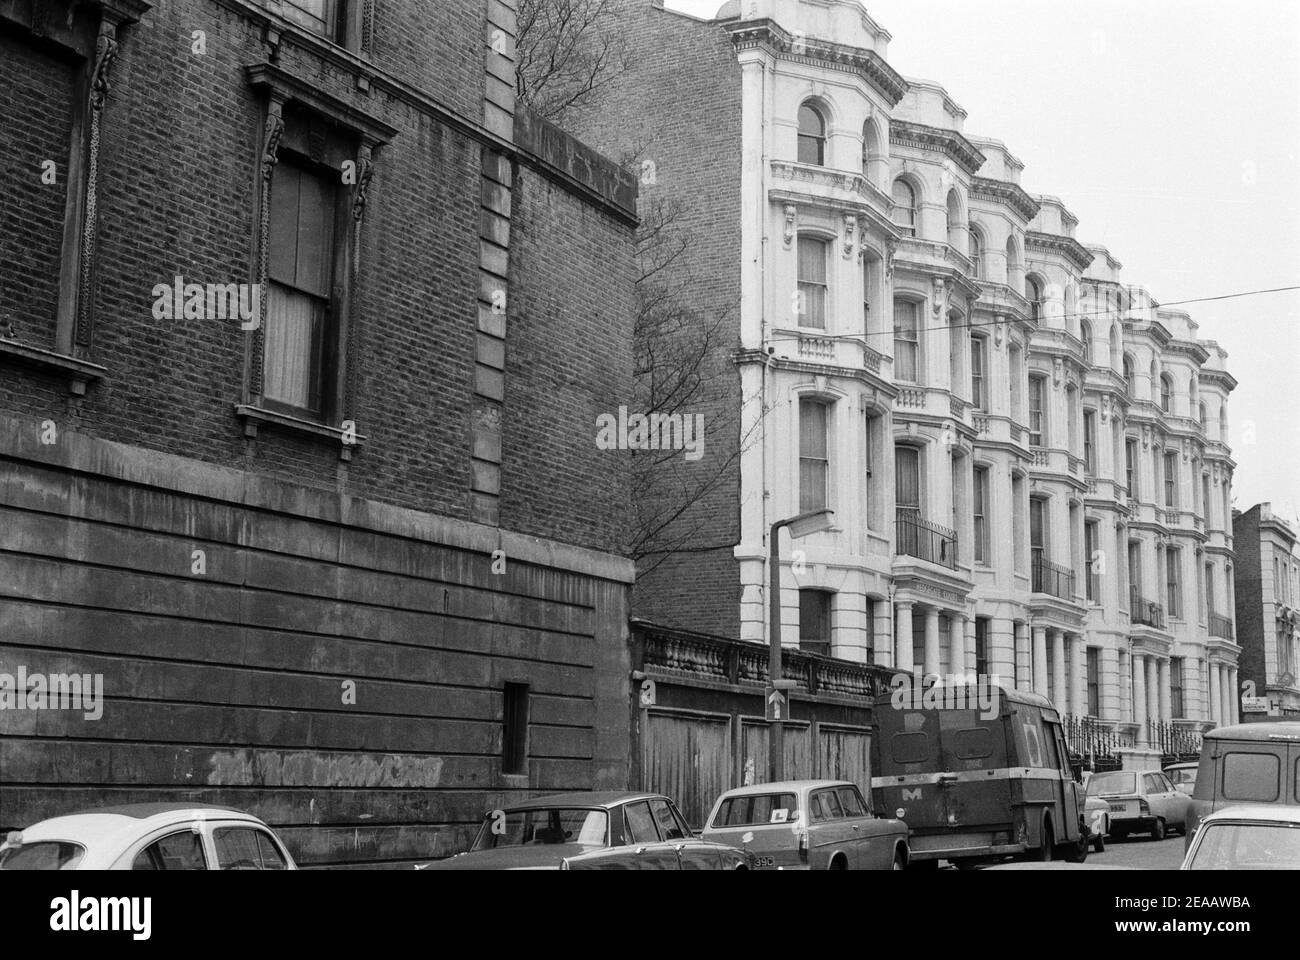 UK, West London, Notting Hill, 1973. Rundown & dilapidated large four-story houses are starting to be restored and redecorated. Powis Terrace, No. 2-4 Hedgegate Court. Near corner with Talbot Road (left). Stock Photo